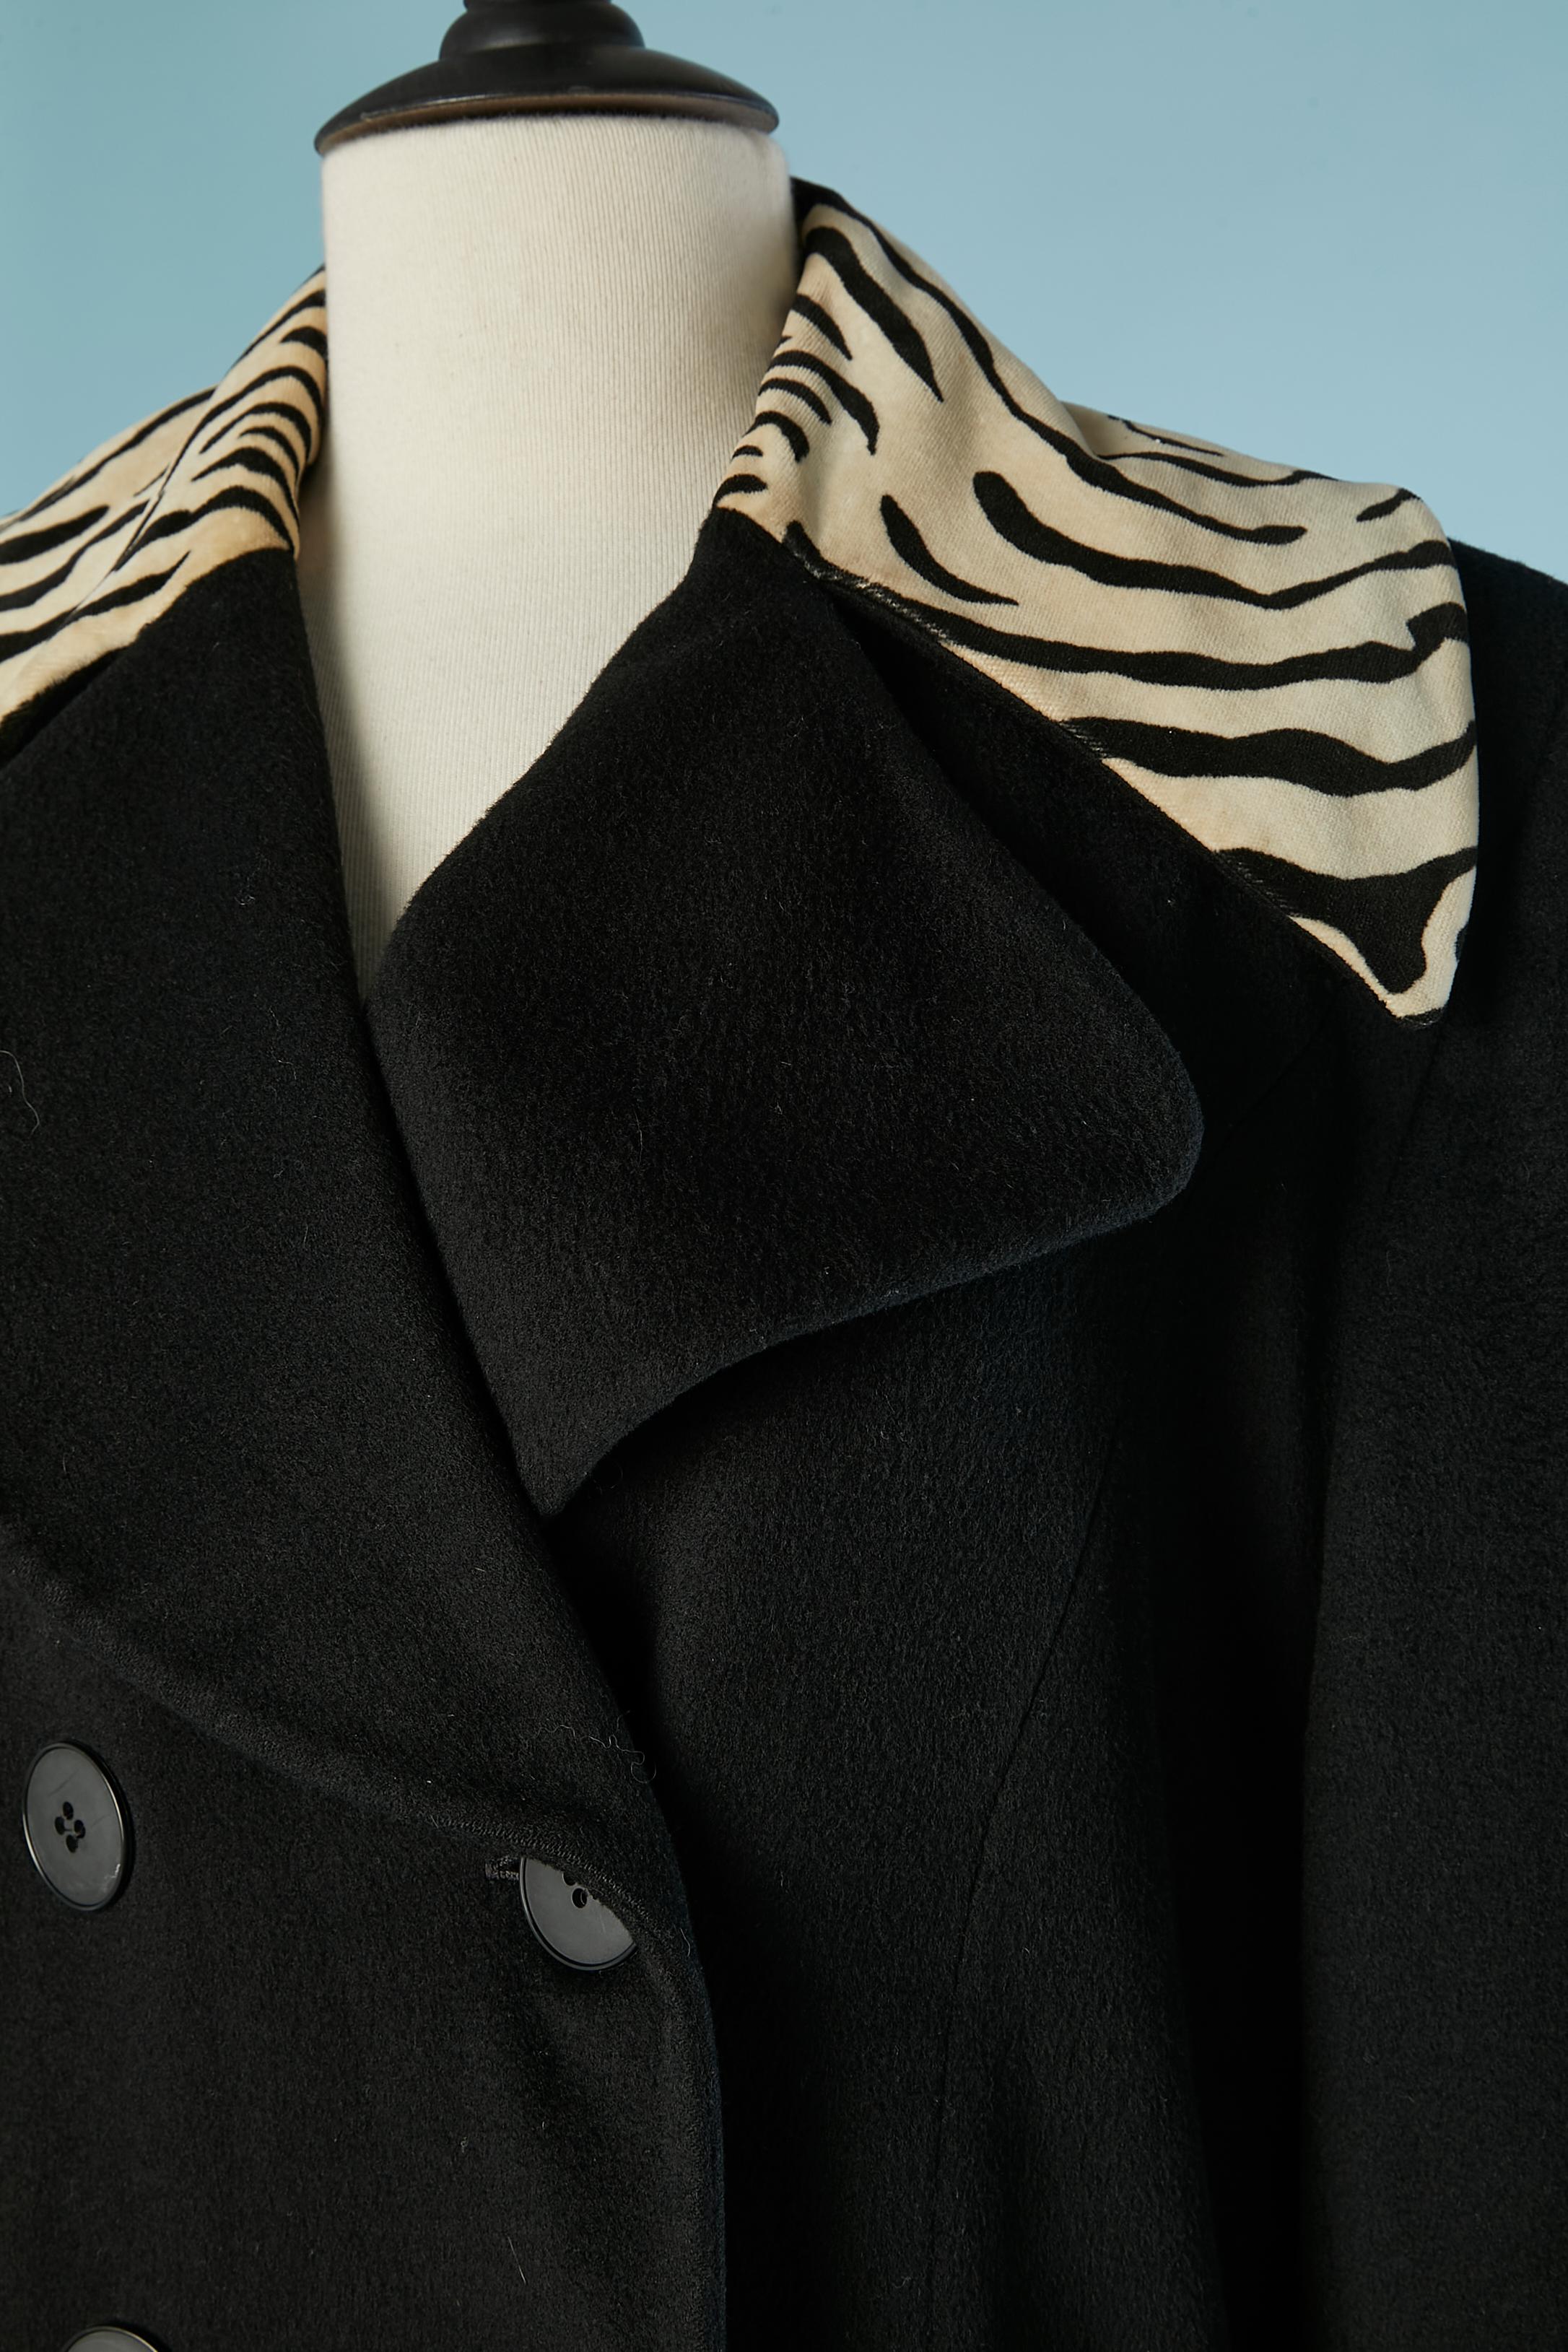 Black lambswool coat with zebra velvet collar and cuffs. Branded rayon lining. 
Shoulder pads;
SIZE L